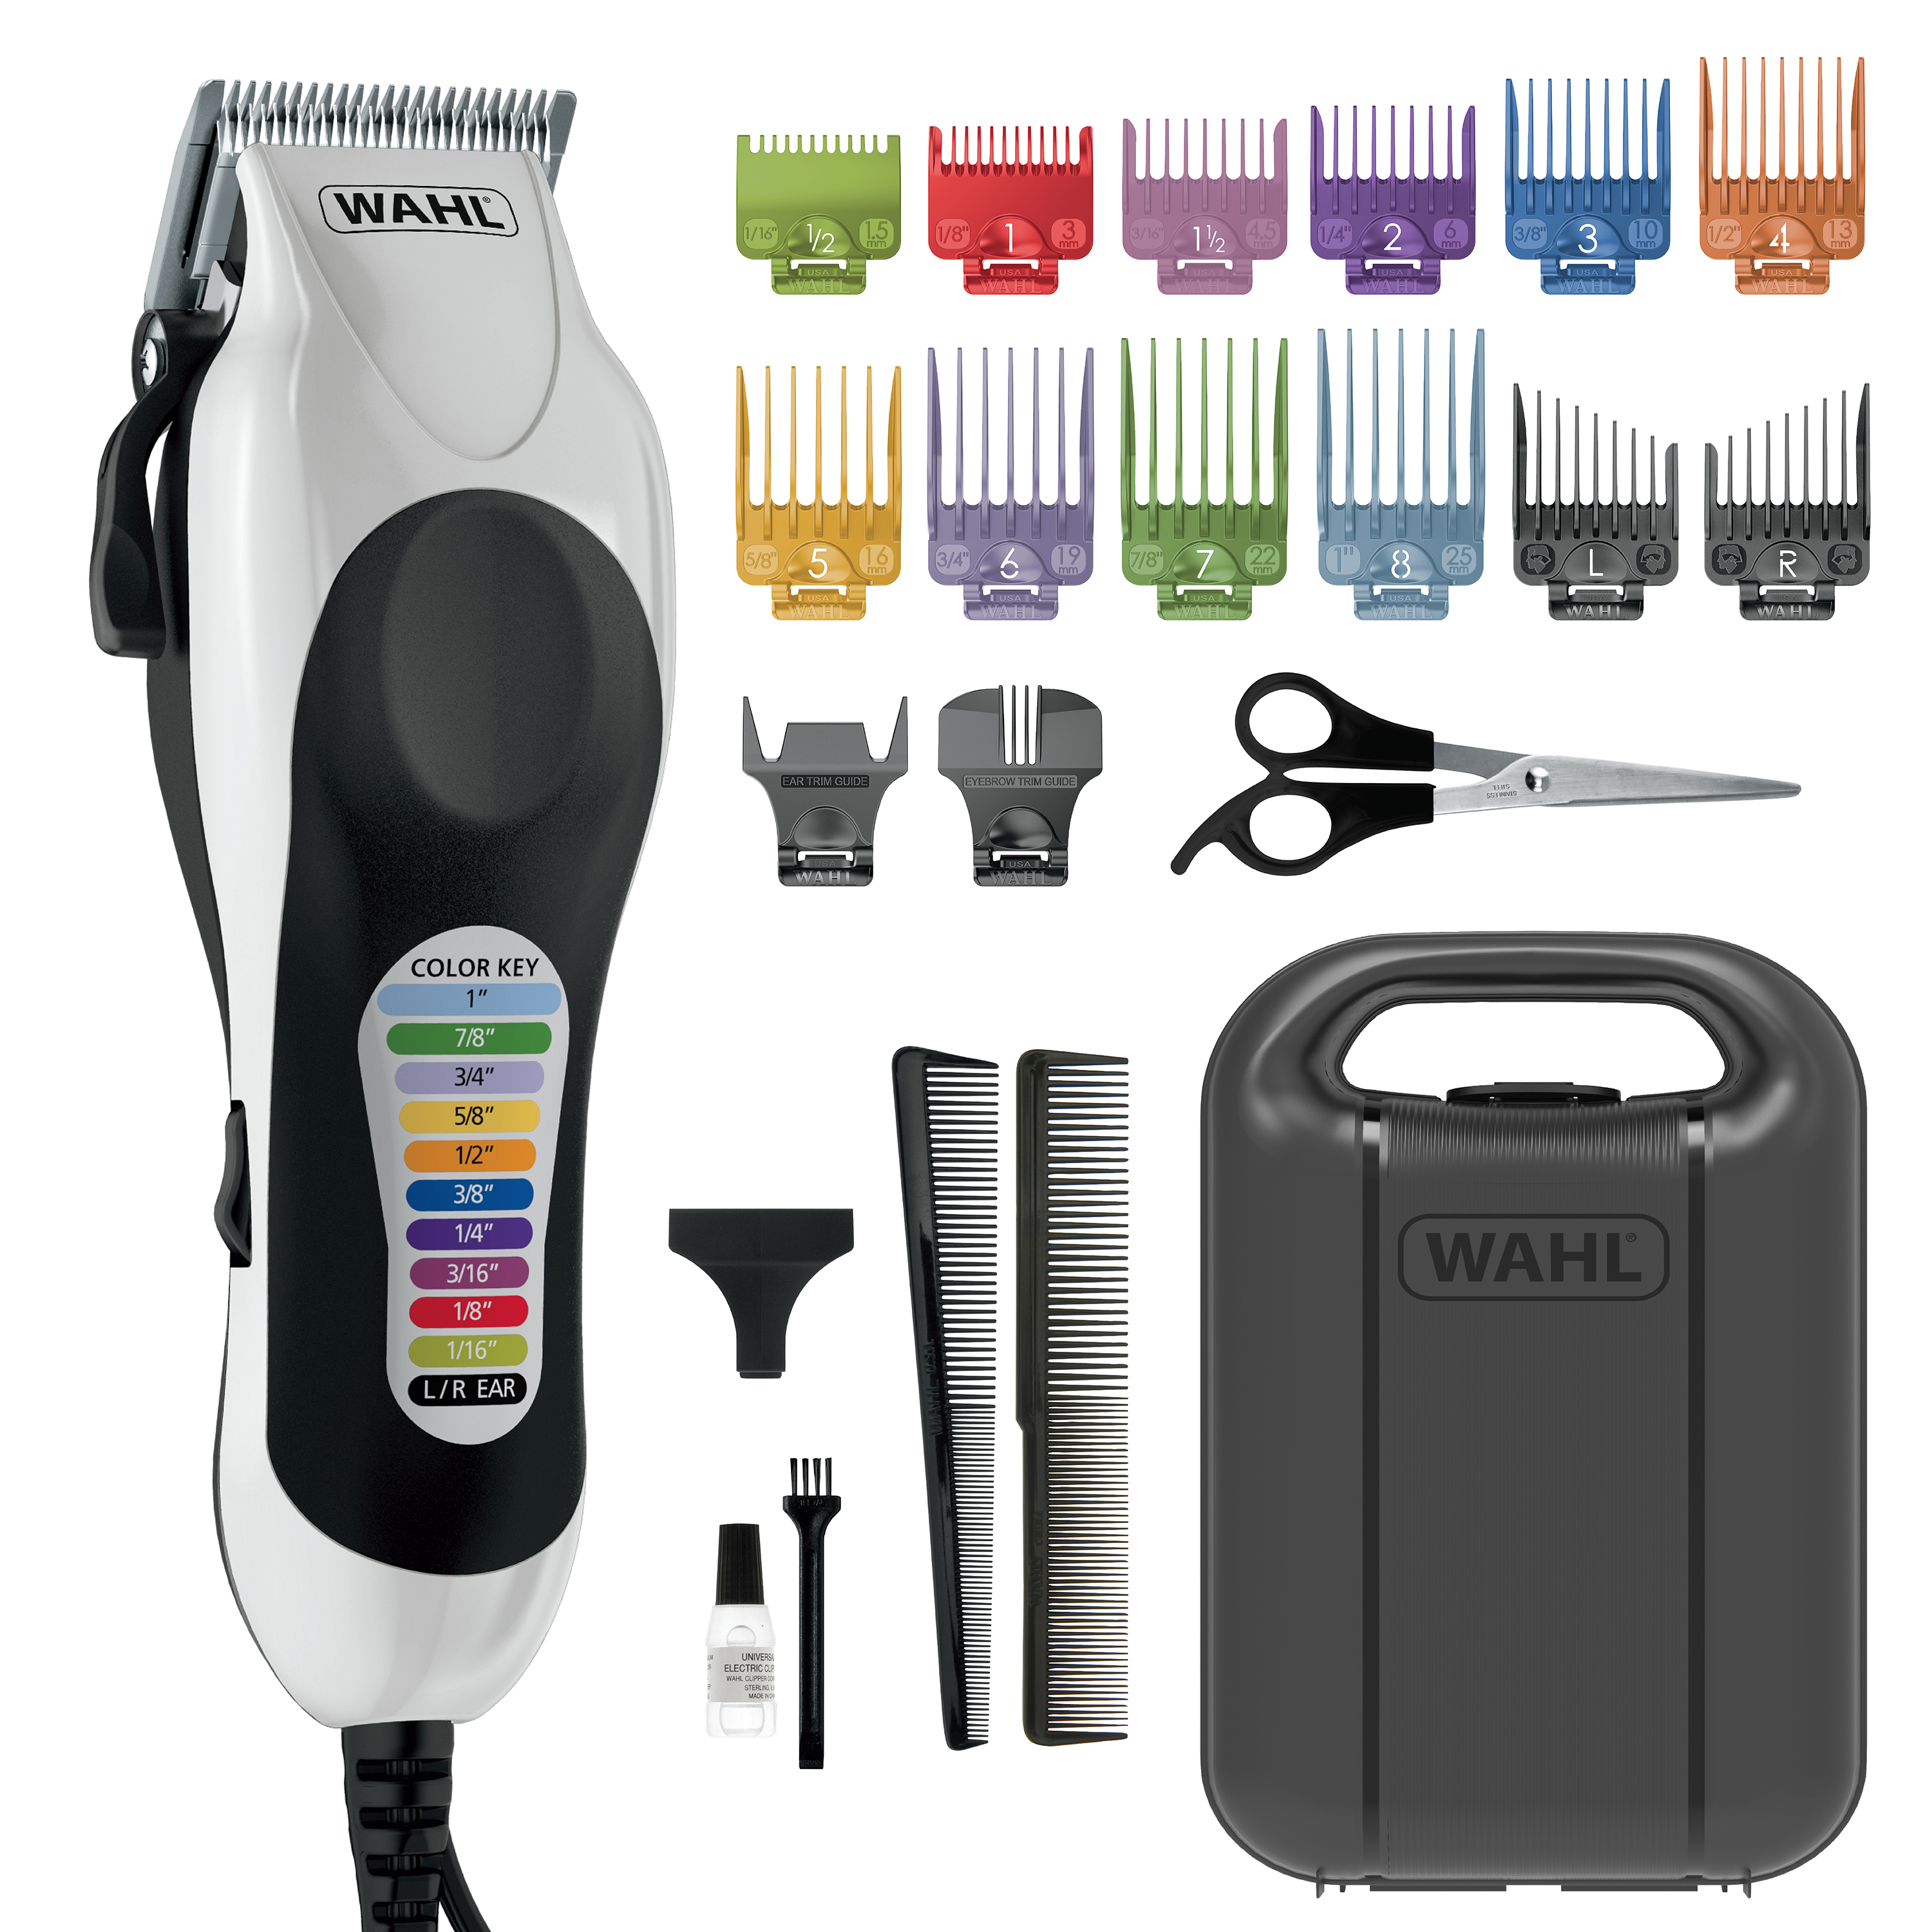 Wahl Color Pro+ Corded Hair Cutting Kit for Men, Women with Colored Attachment Combs, 79752T - image 1 of 9